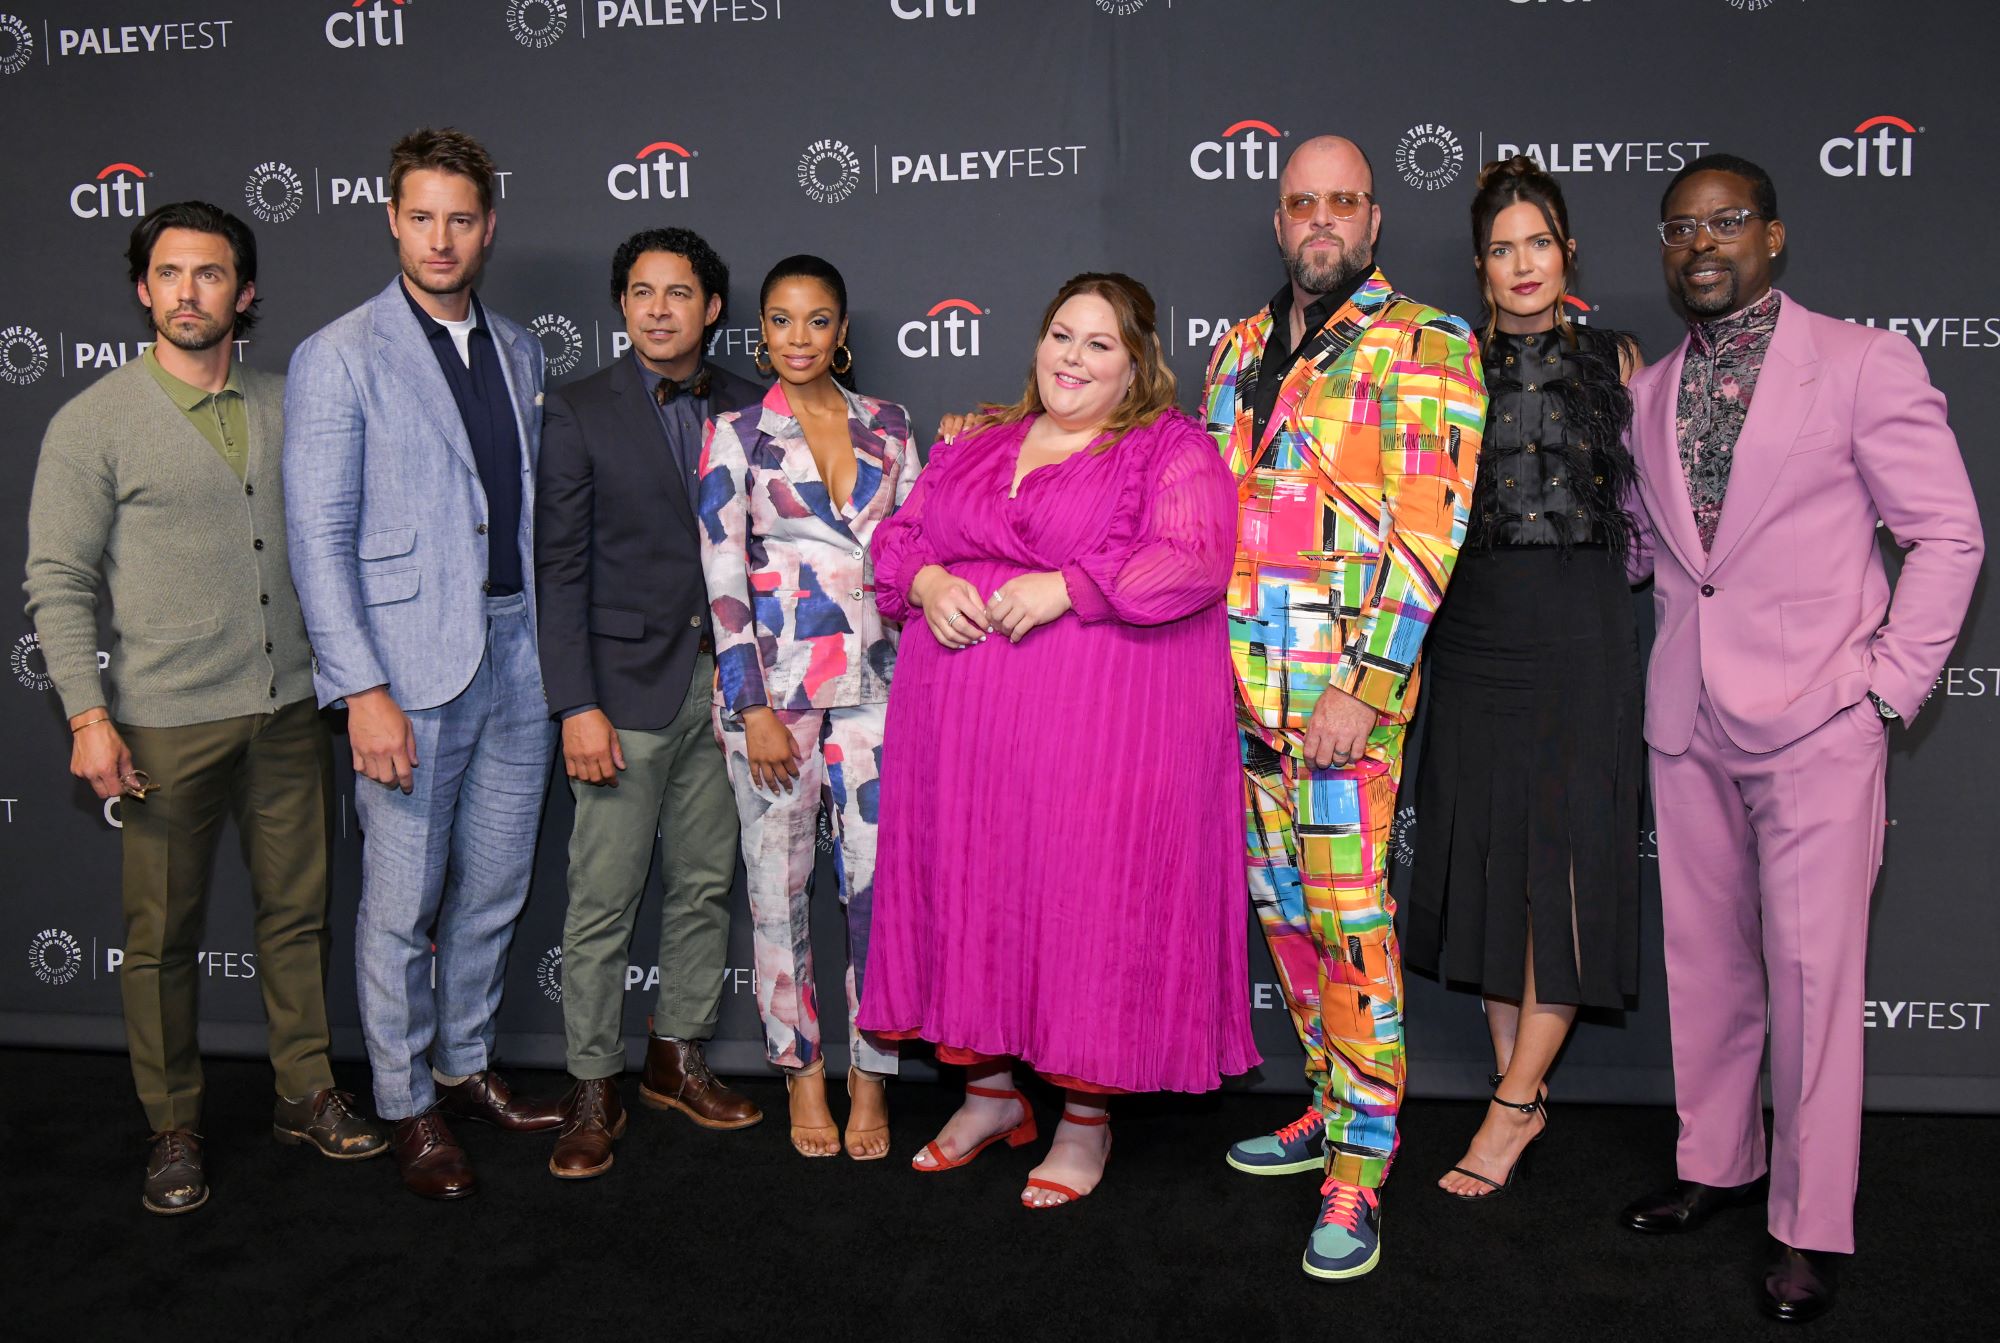 'This Is Us' fans reacted to an Instagram video made by the series cast including Milo Ventimiglia, Justin Hartley, Jon Huertas, Susan Kelechi Watson, Chrissy Metz, Chris Sullivan, Mandy Moore, and Sterling K. Brown.